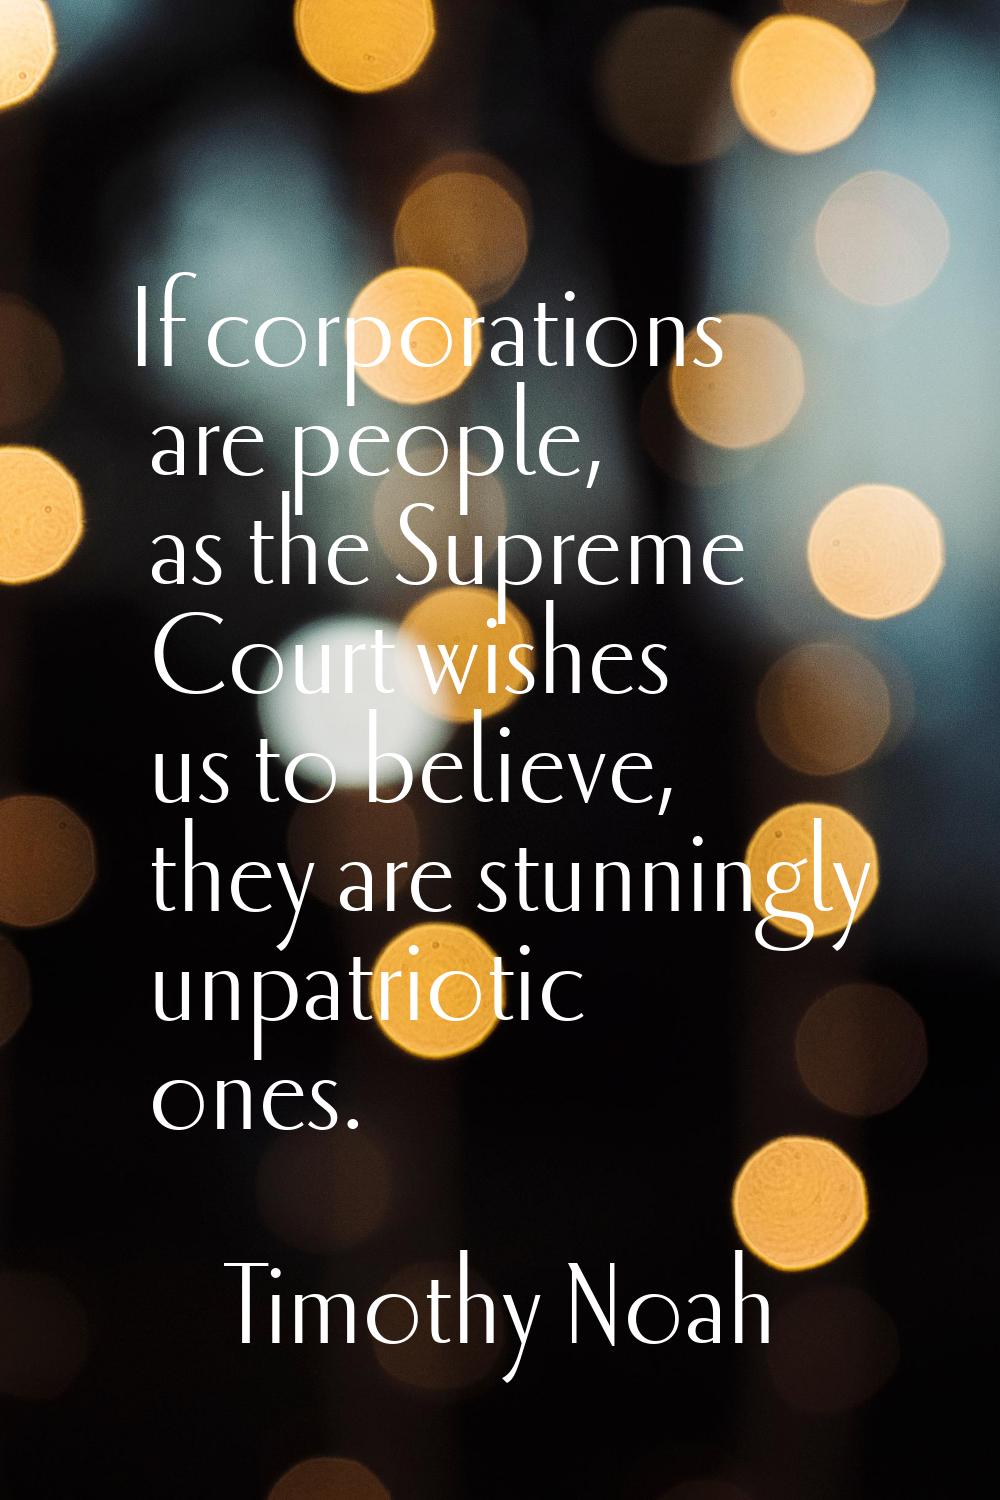 If corporations are people, as the Supreme Court wishes us to believe, they are stunningly unpatrio